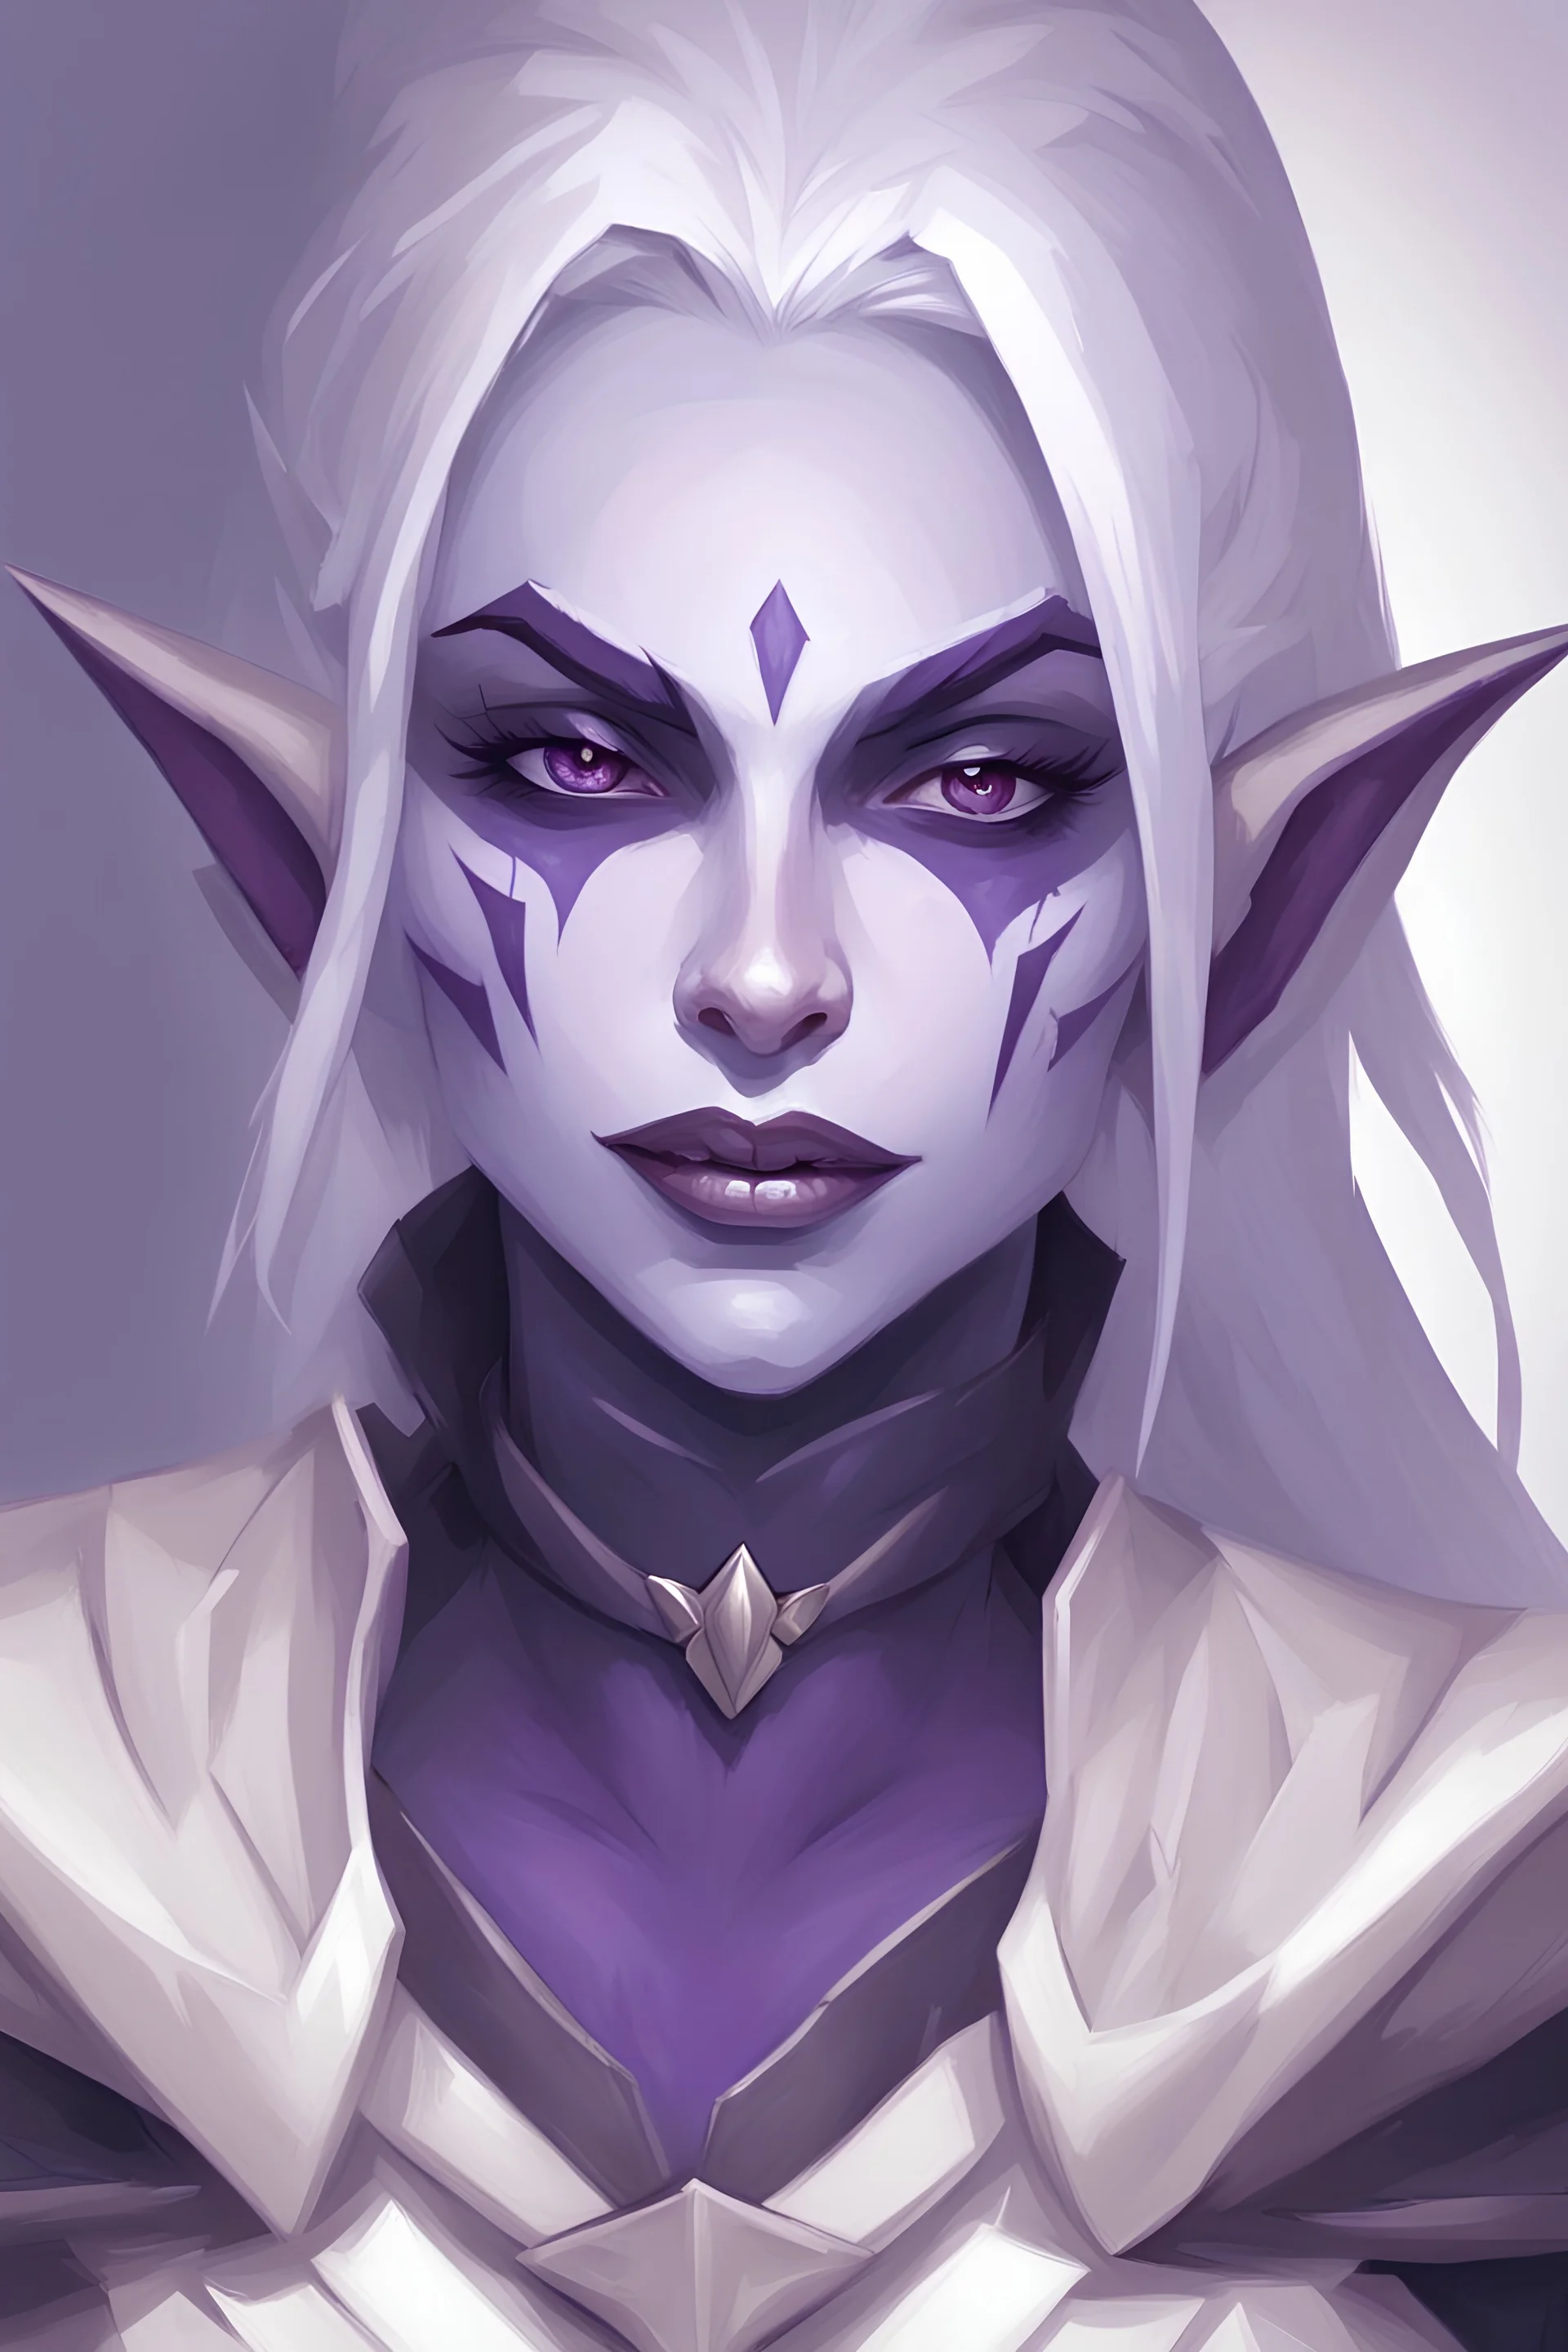 Dungeons and Dragons portrait of the face of a female drow rogue with pale armor, dark purple skin, happy expression and white hair